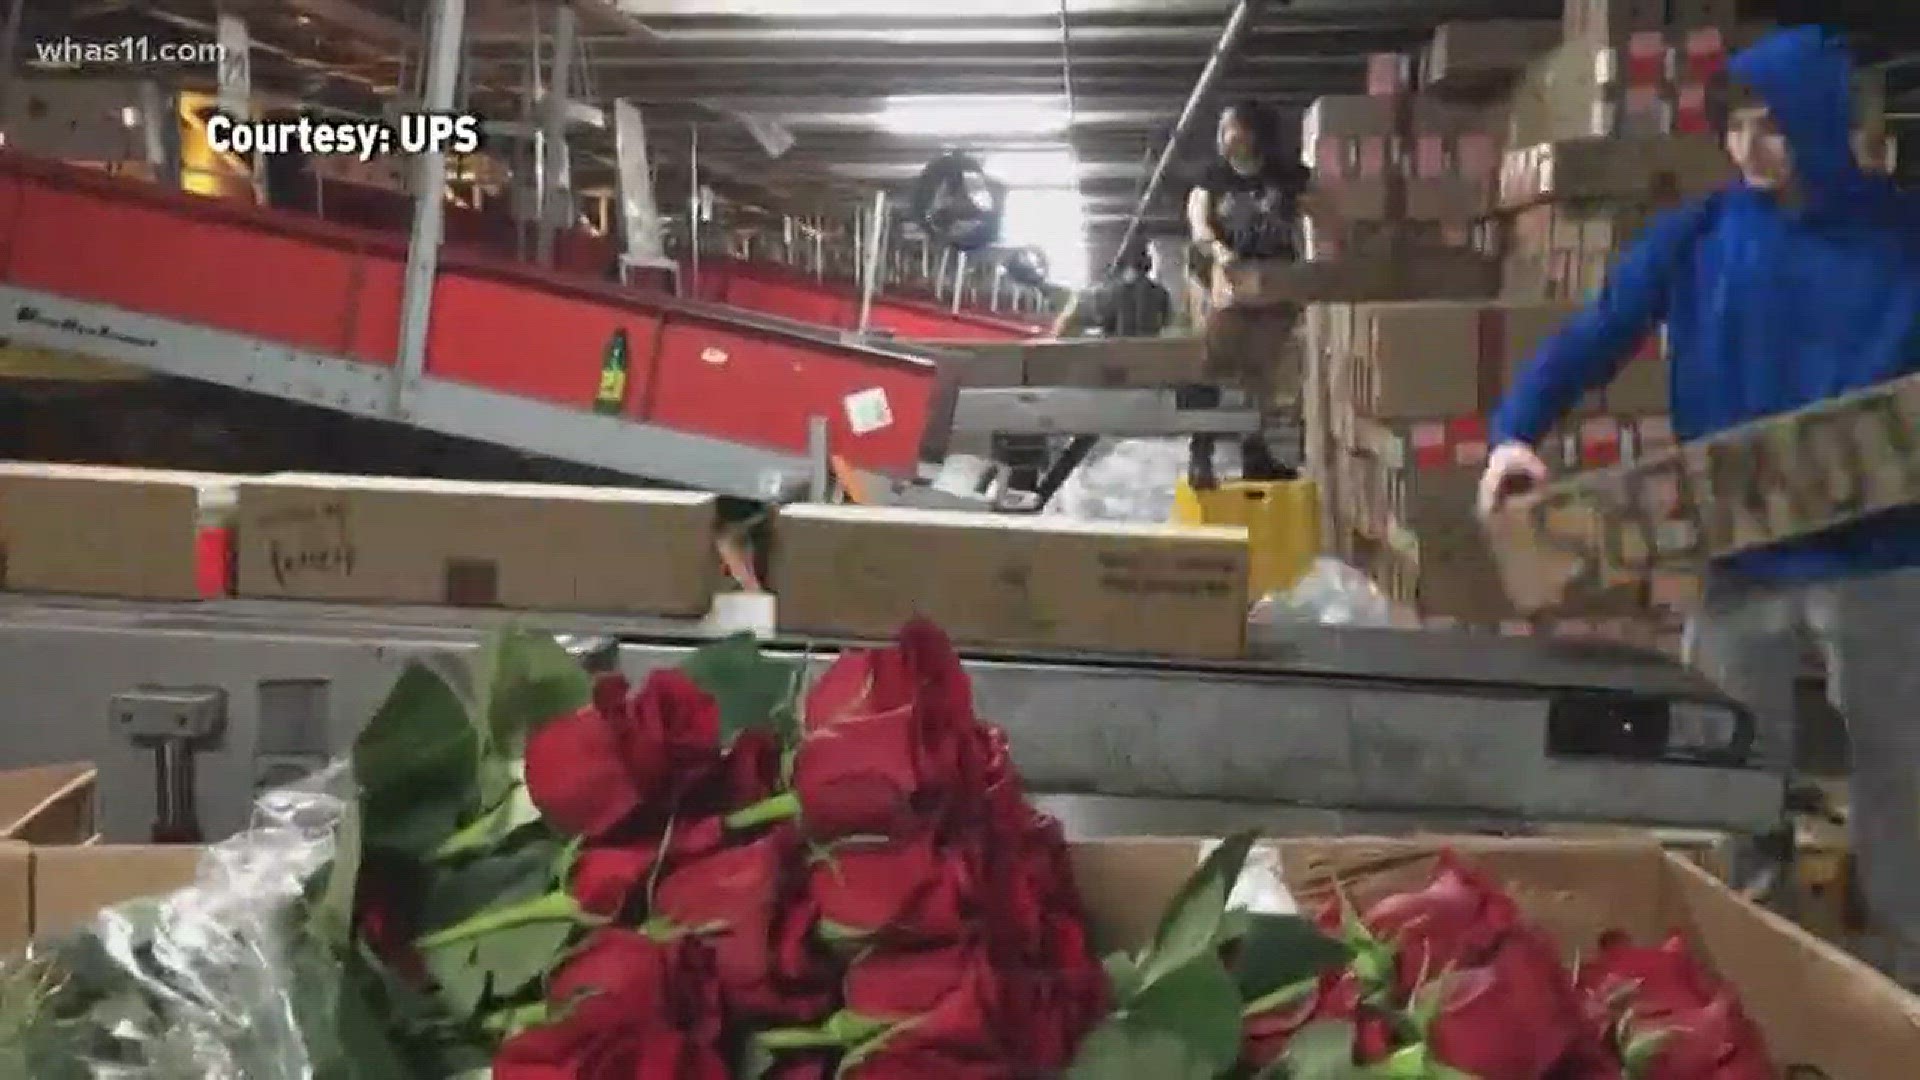 The season of love is also the busy season for UPS Worldport.